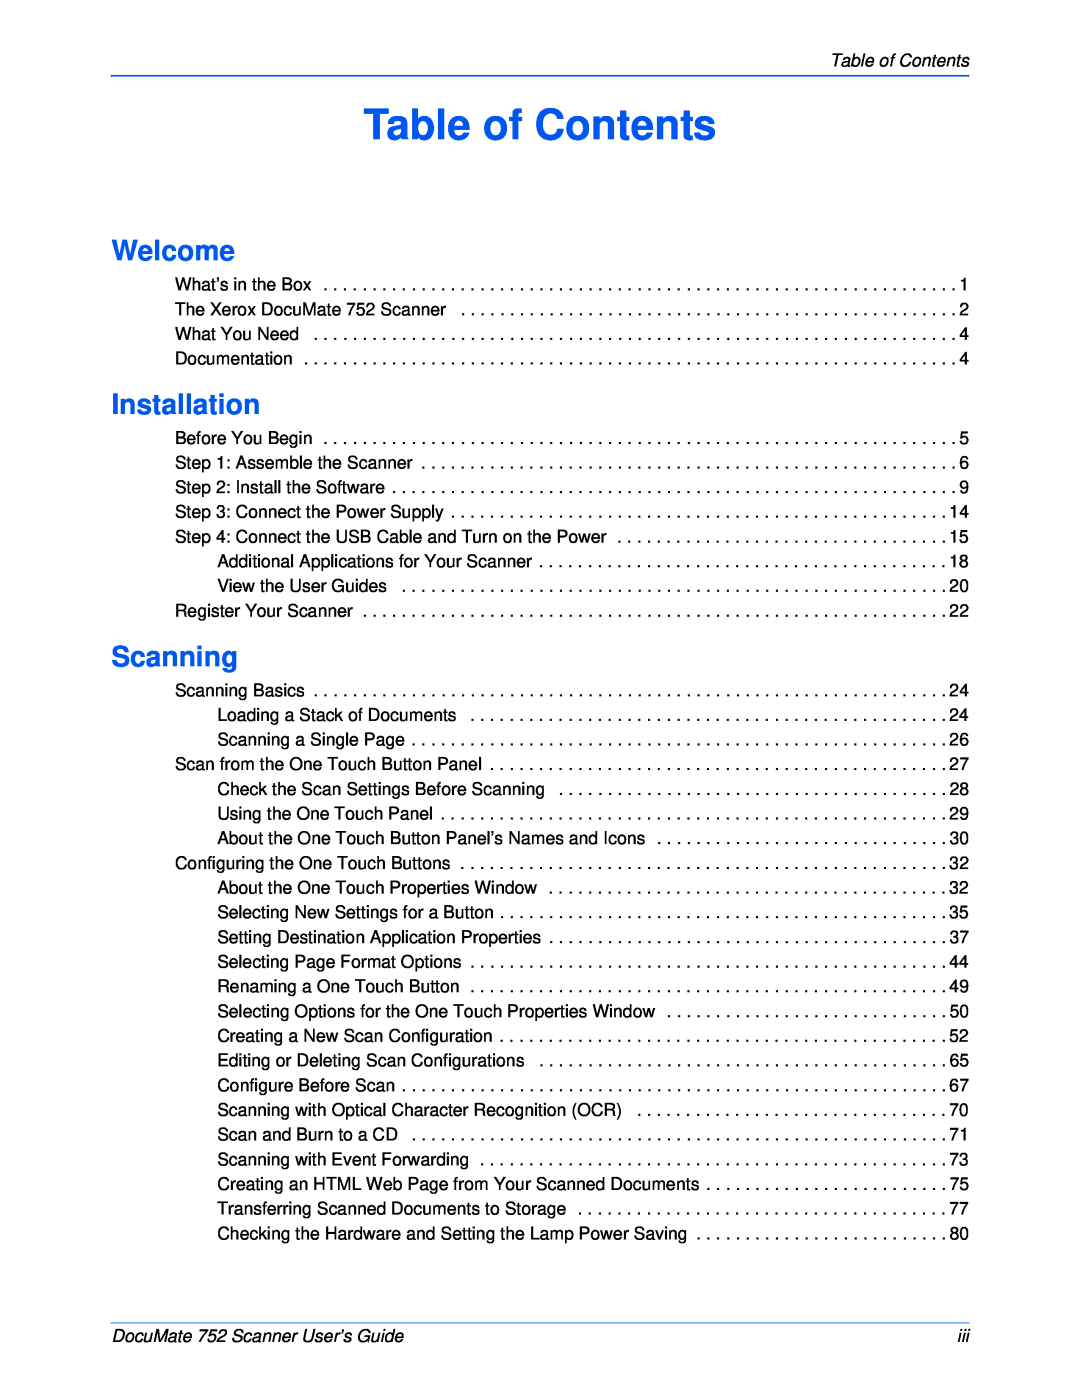 Xerox manual Table of Contents, Welcome, Installation, Scanning, DocuMate 752 Scanner User’s Guide 